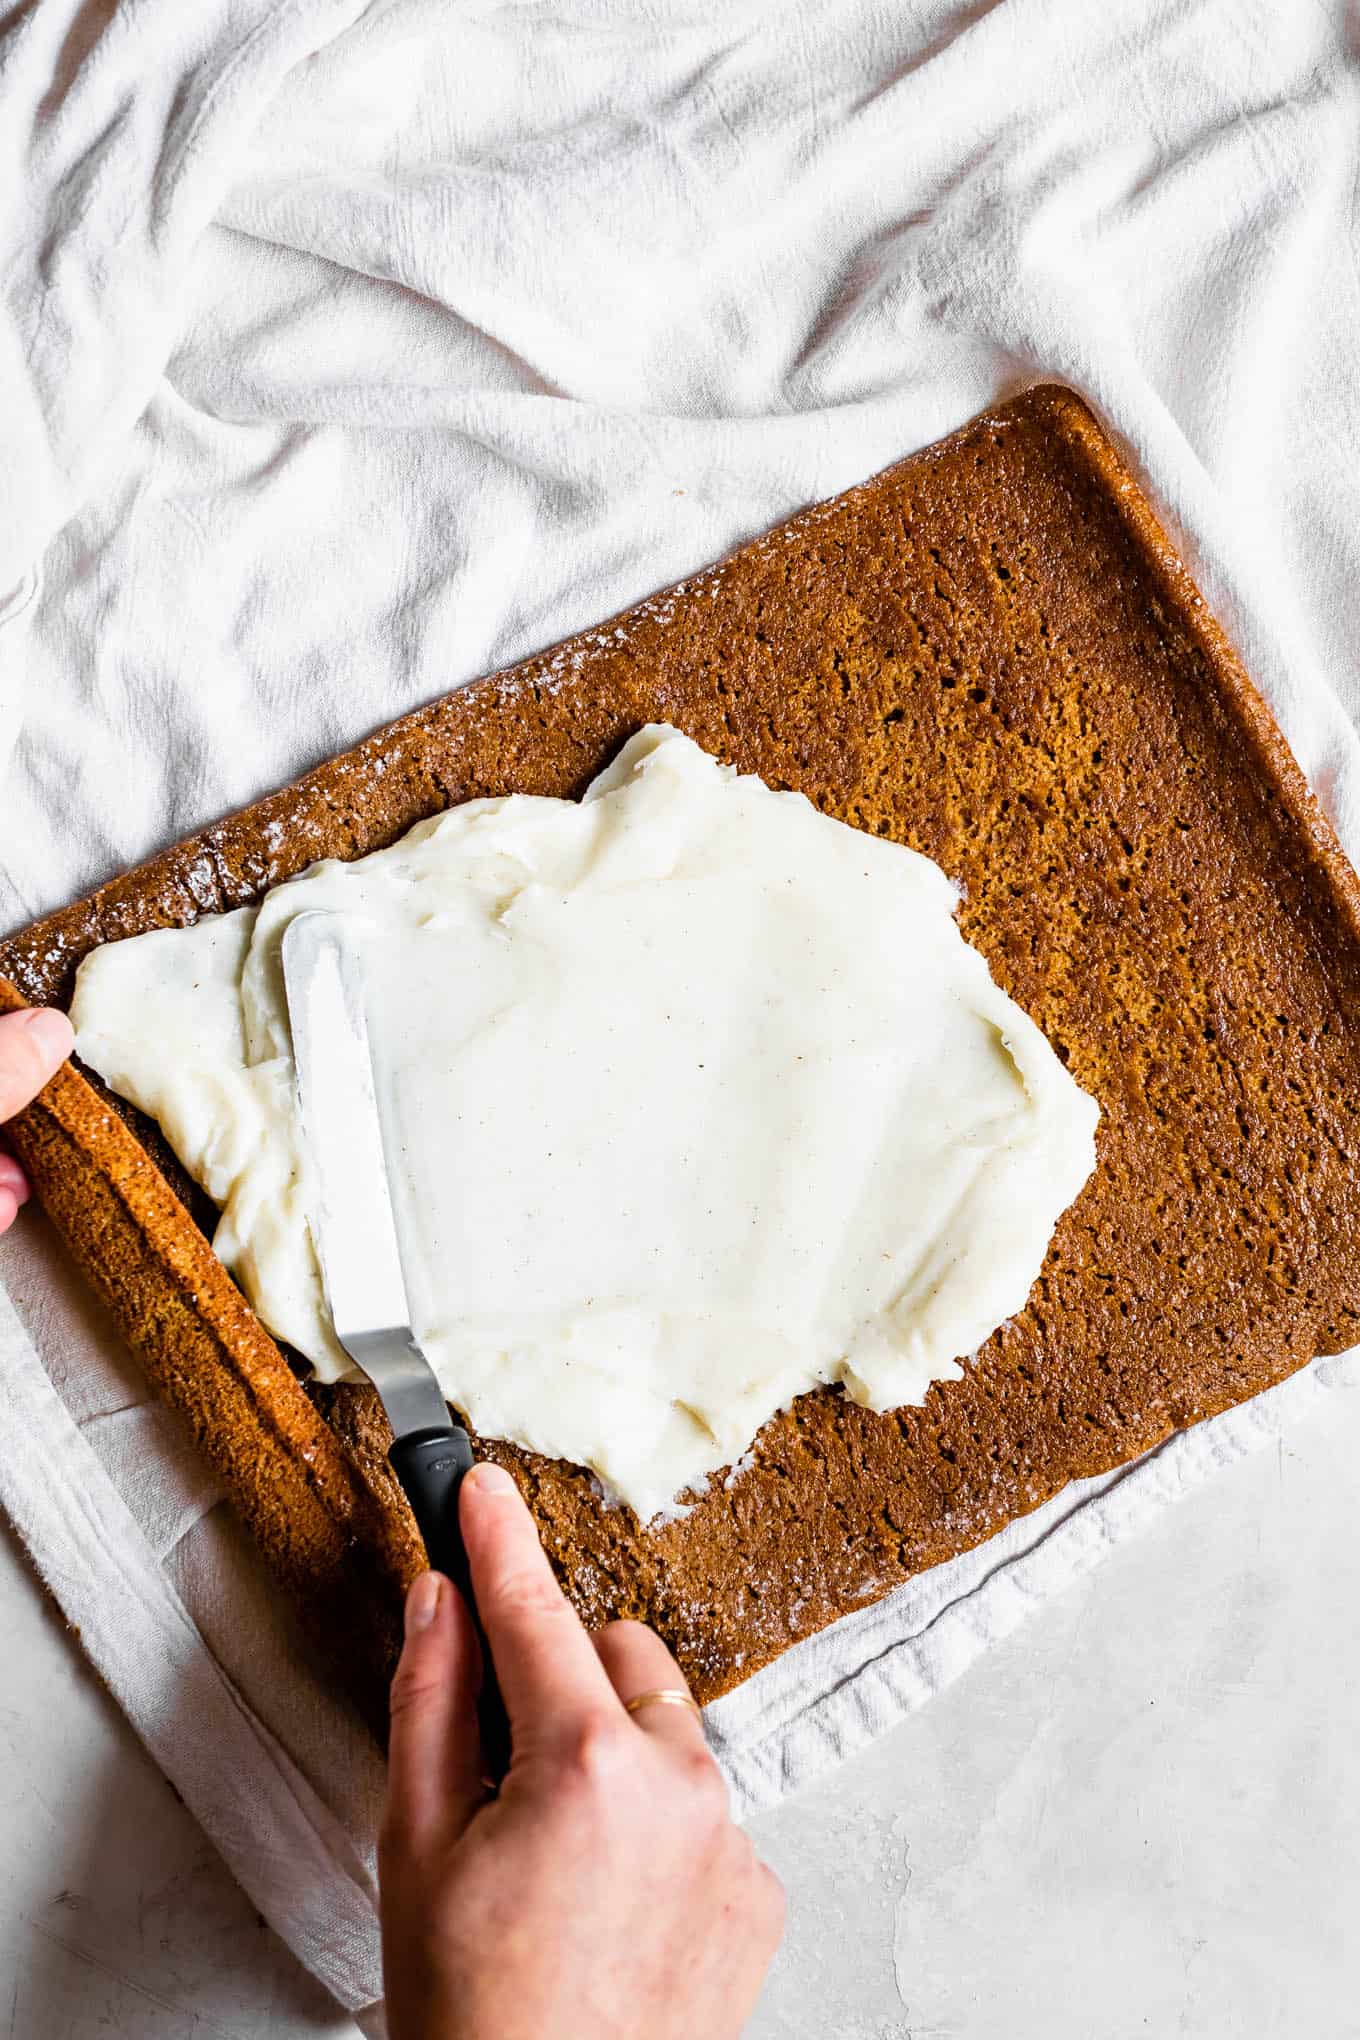 How to Roll a Gluten-Free Pumpkin Jelly Roll with Cream Cheese Frosting